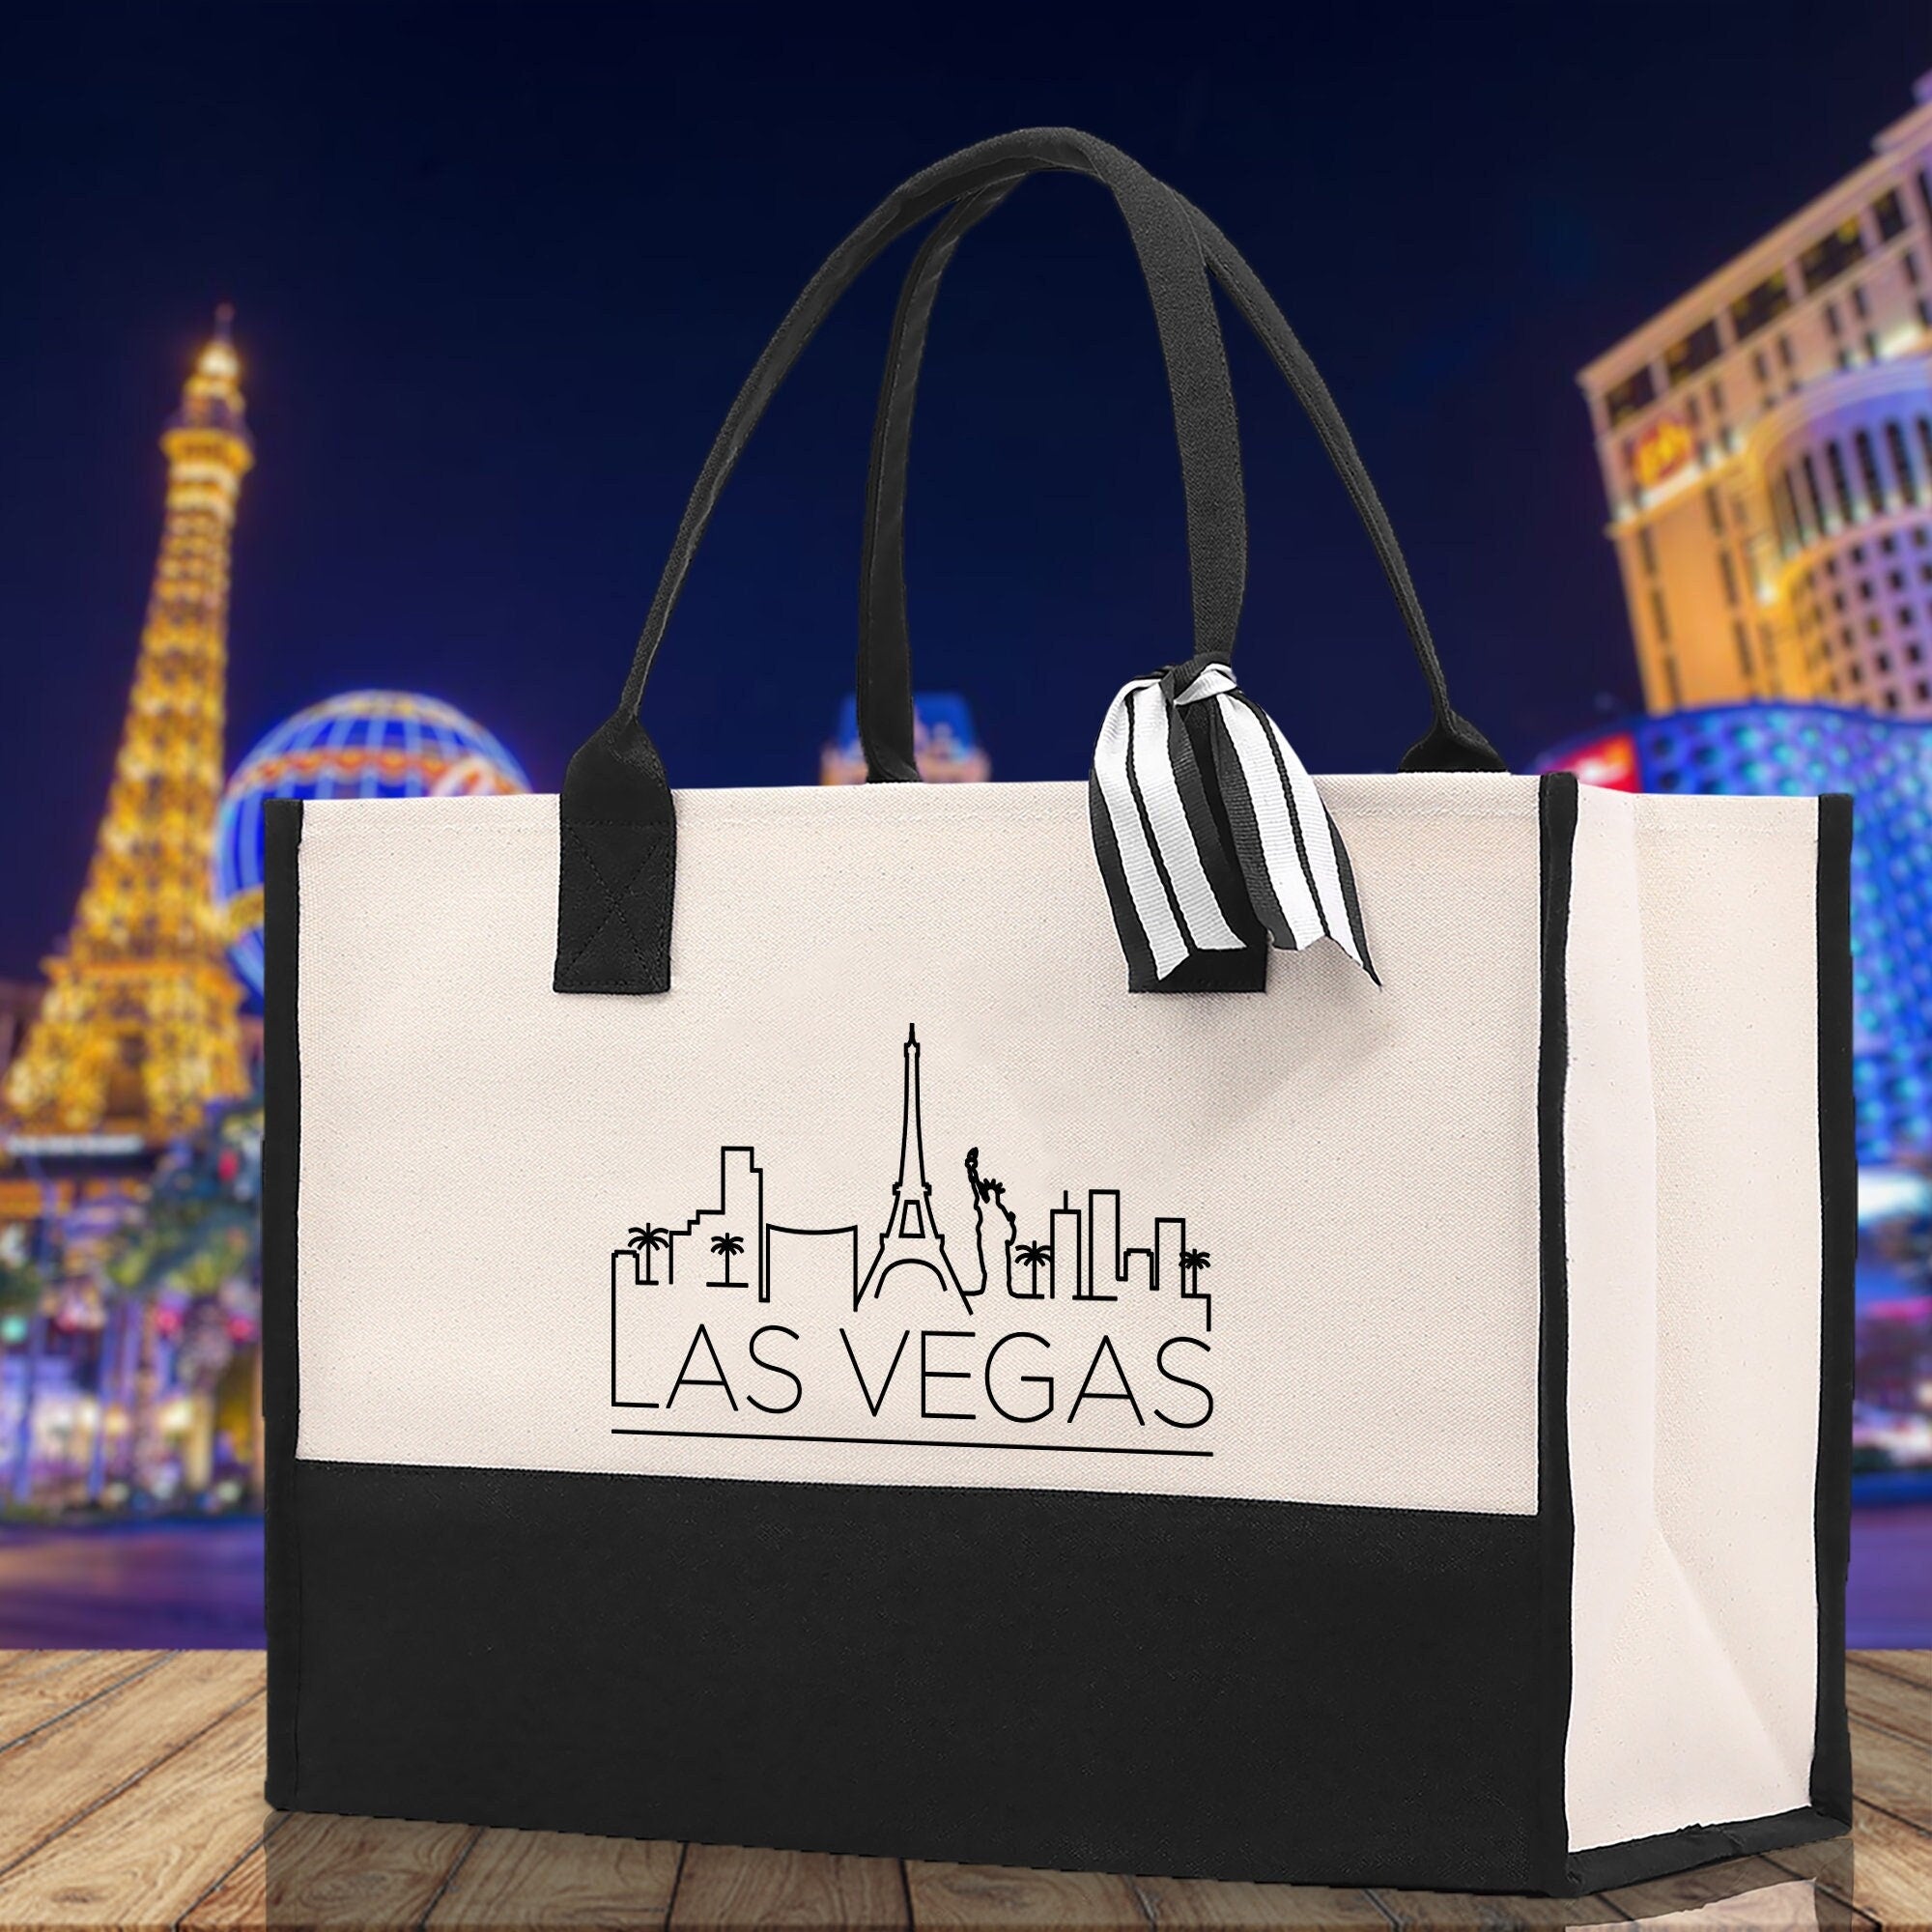 Las Vegas Cotton Canvas Tote Bag Travel Vacation Tote Employee and Client Gift Wedding Favor Birthday Welcome Tote Bag Bridesmaid Gift